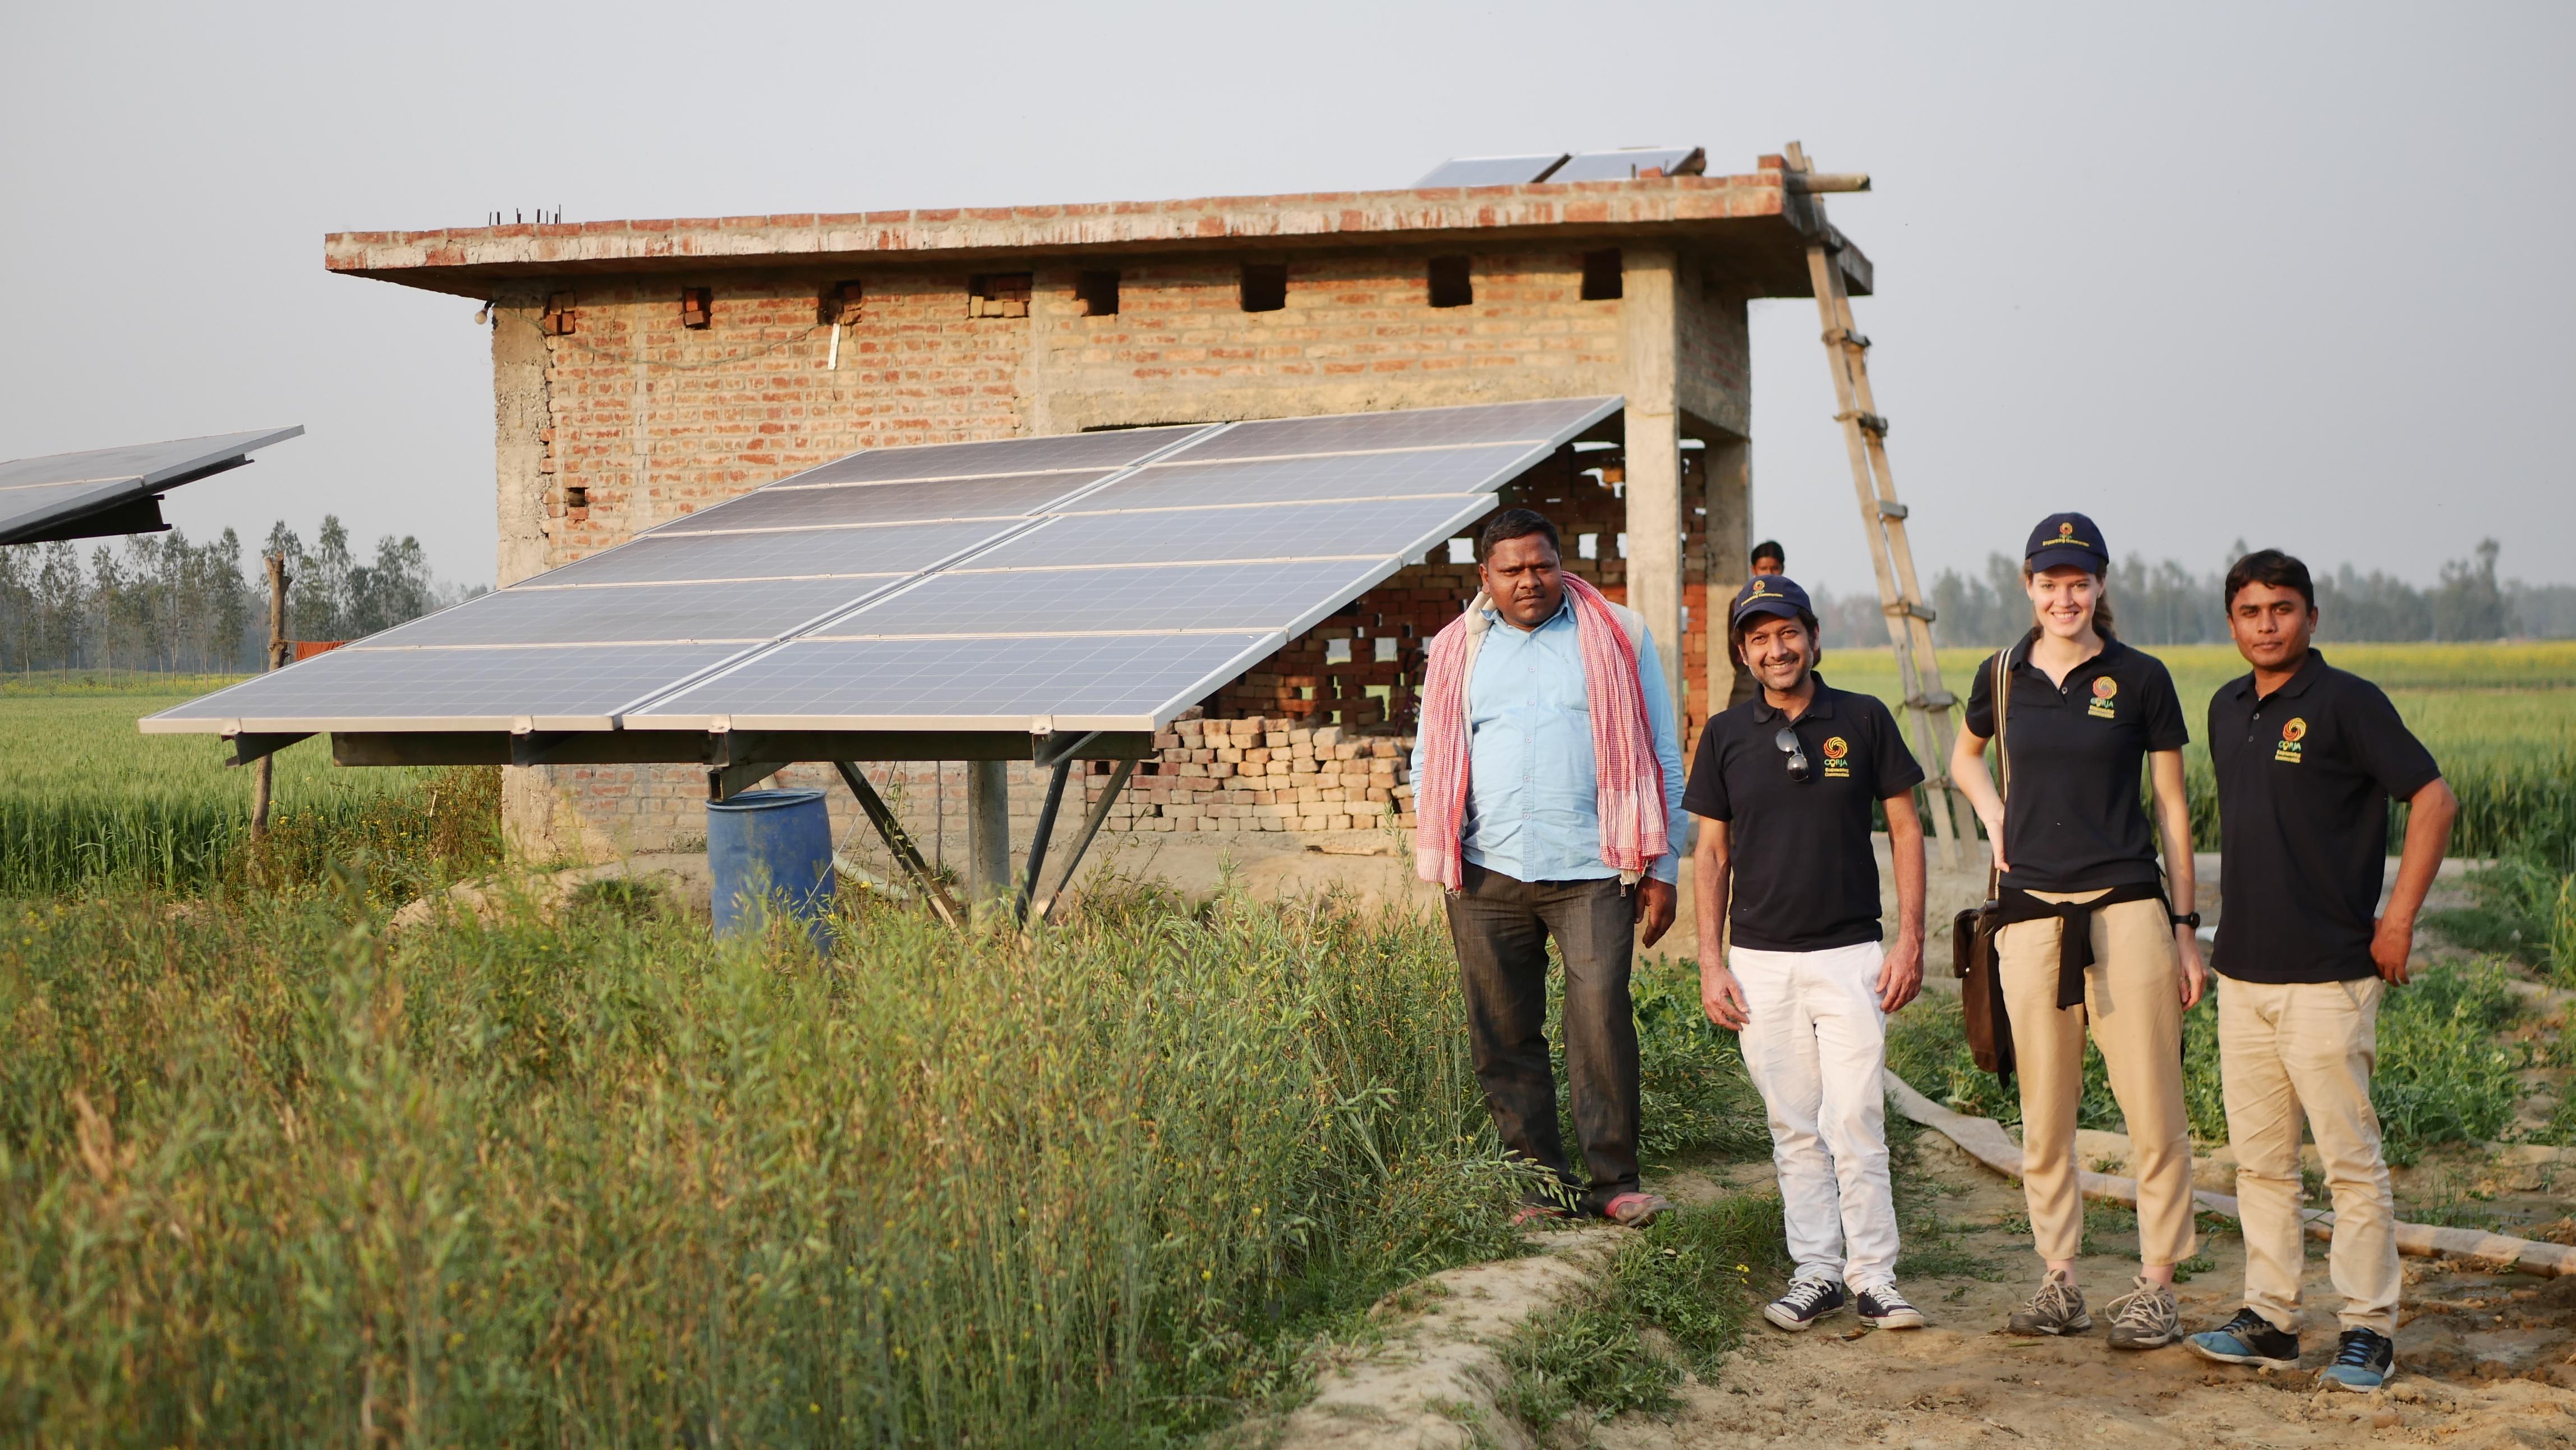 Solar irrigation solutions for smallholder farmers in India